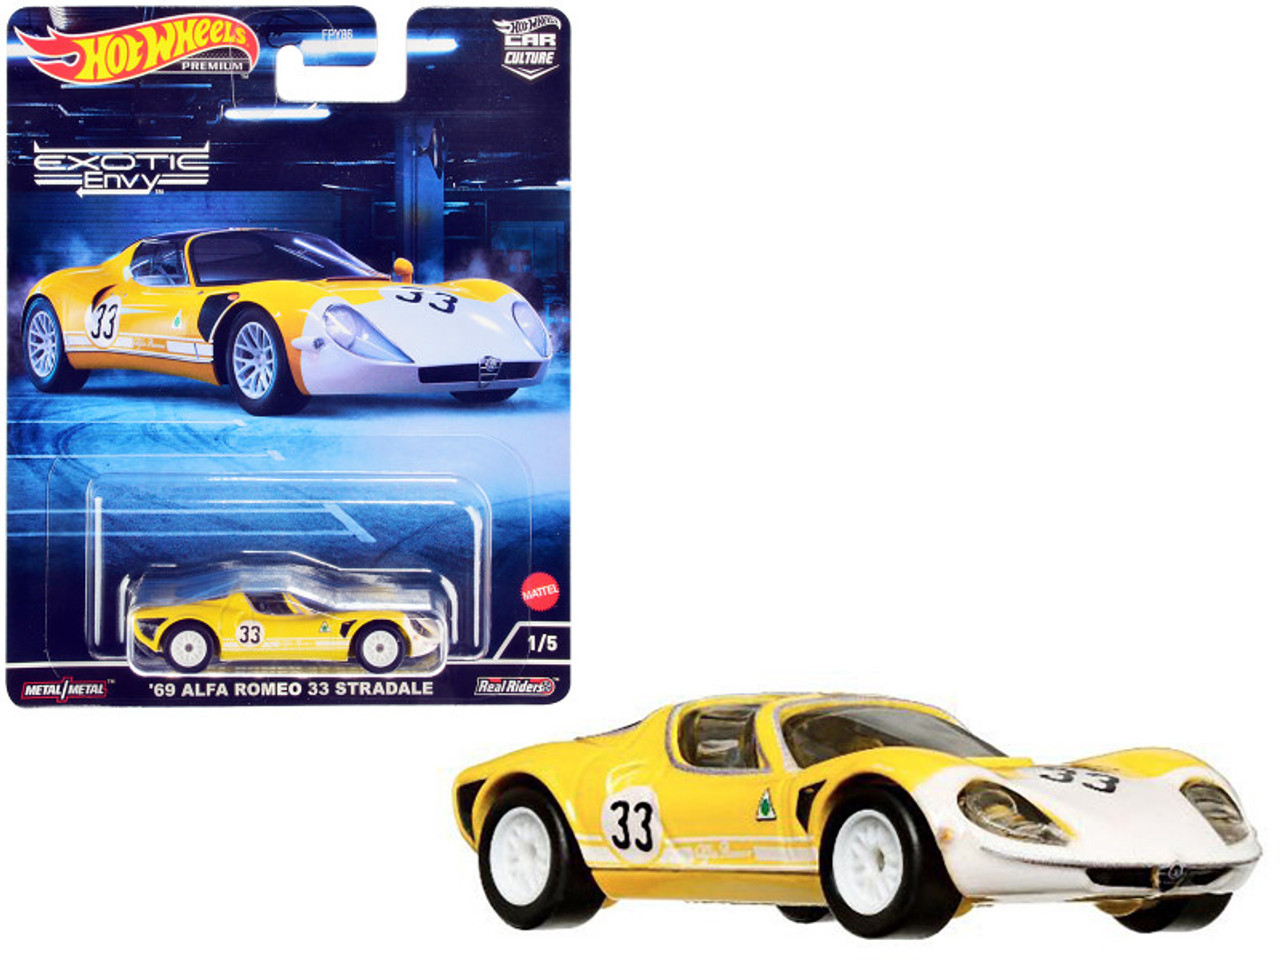 1969 Alfa Romeo 33 Stradale #33 Yellow and White "Exotic Envy" Series Diecast Model Car by Hot Wheels